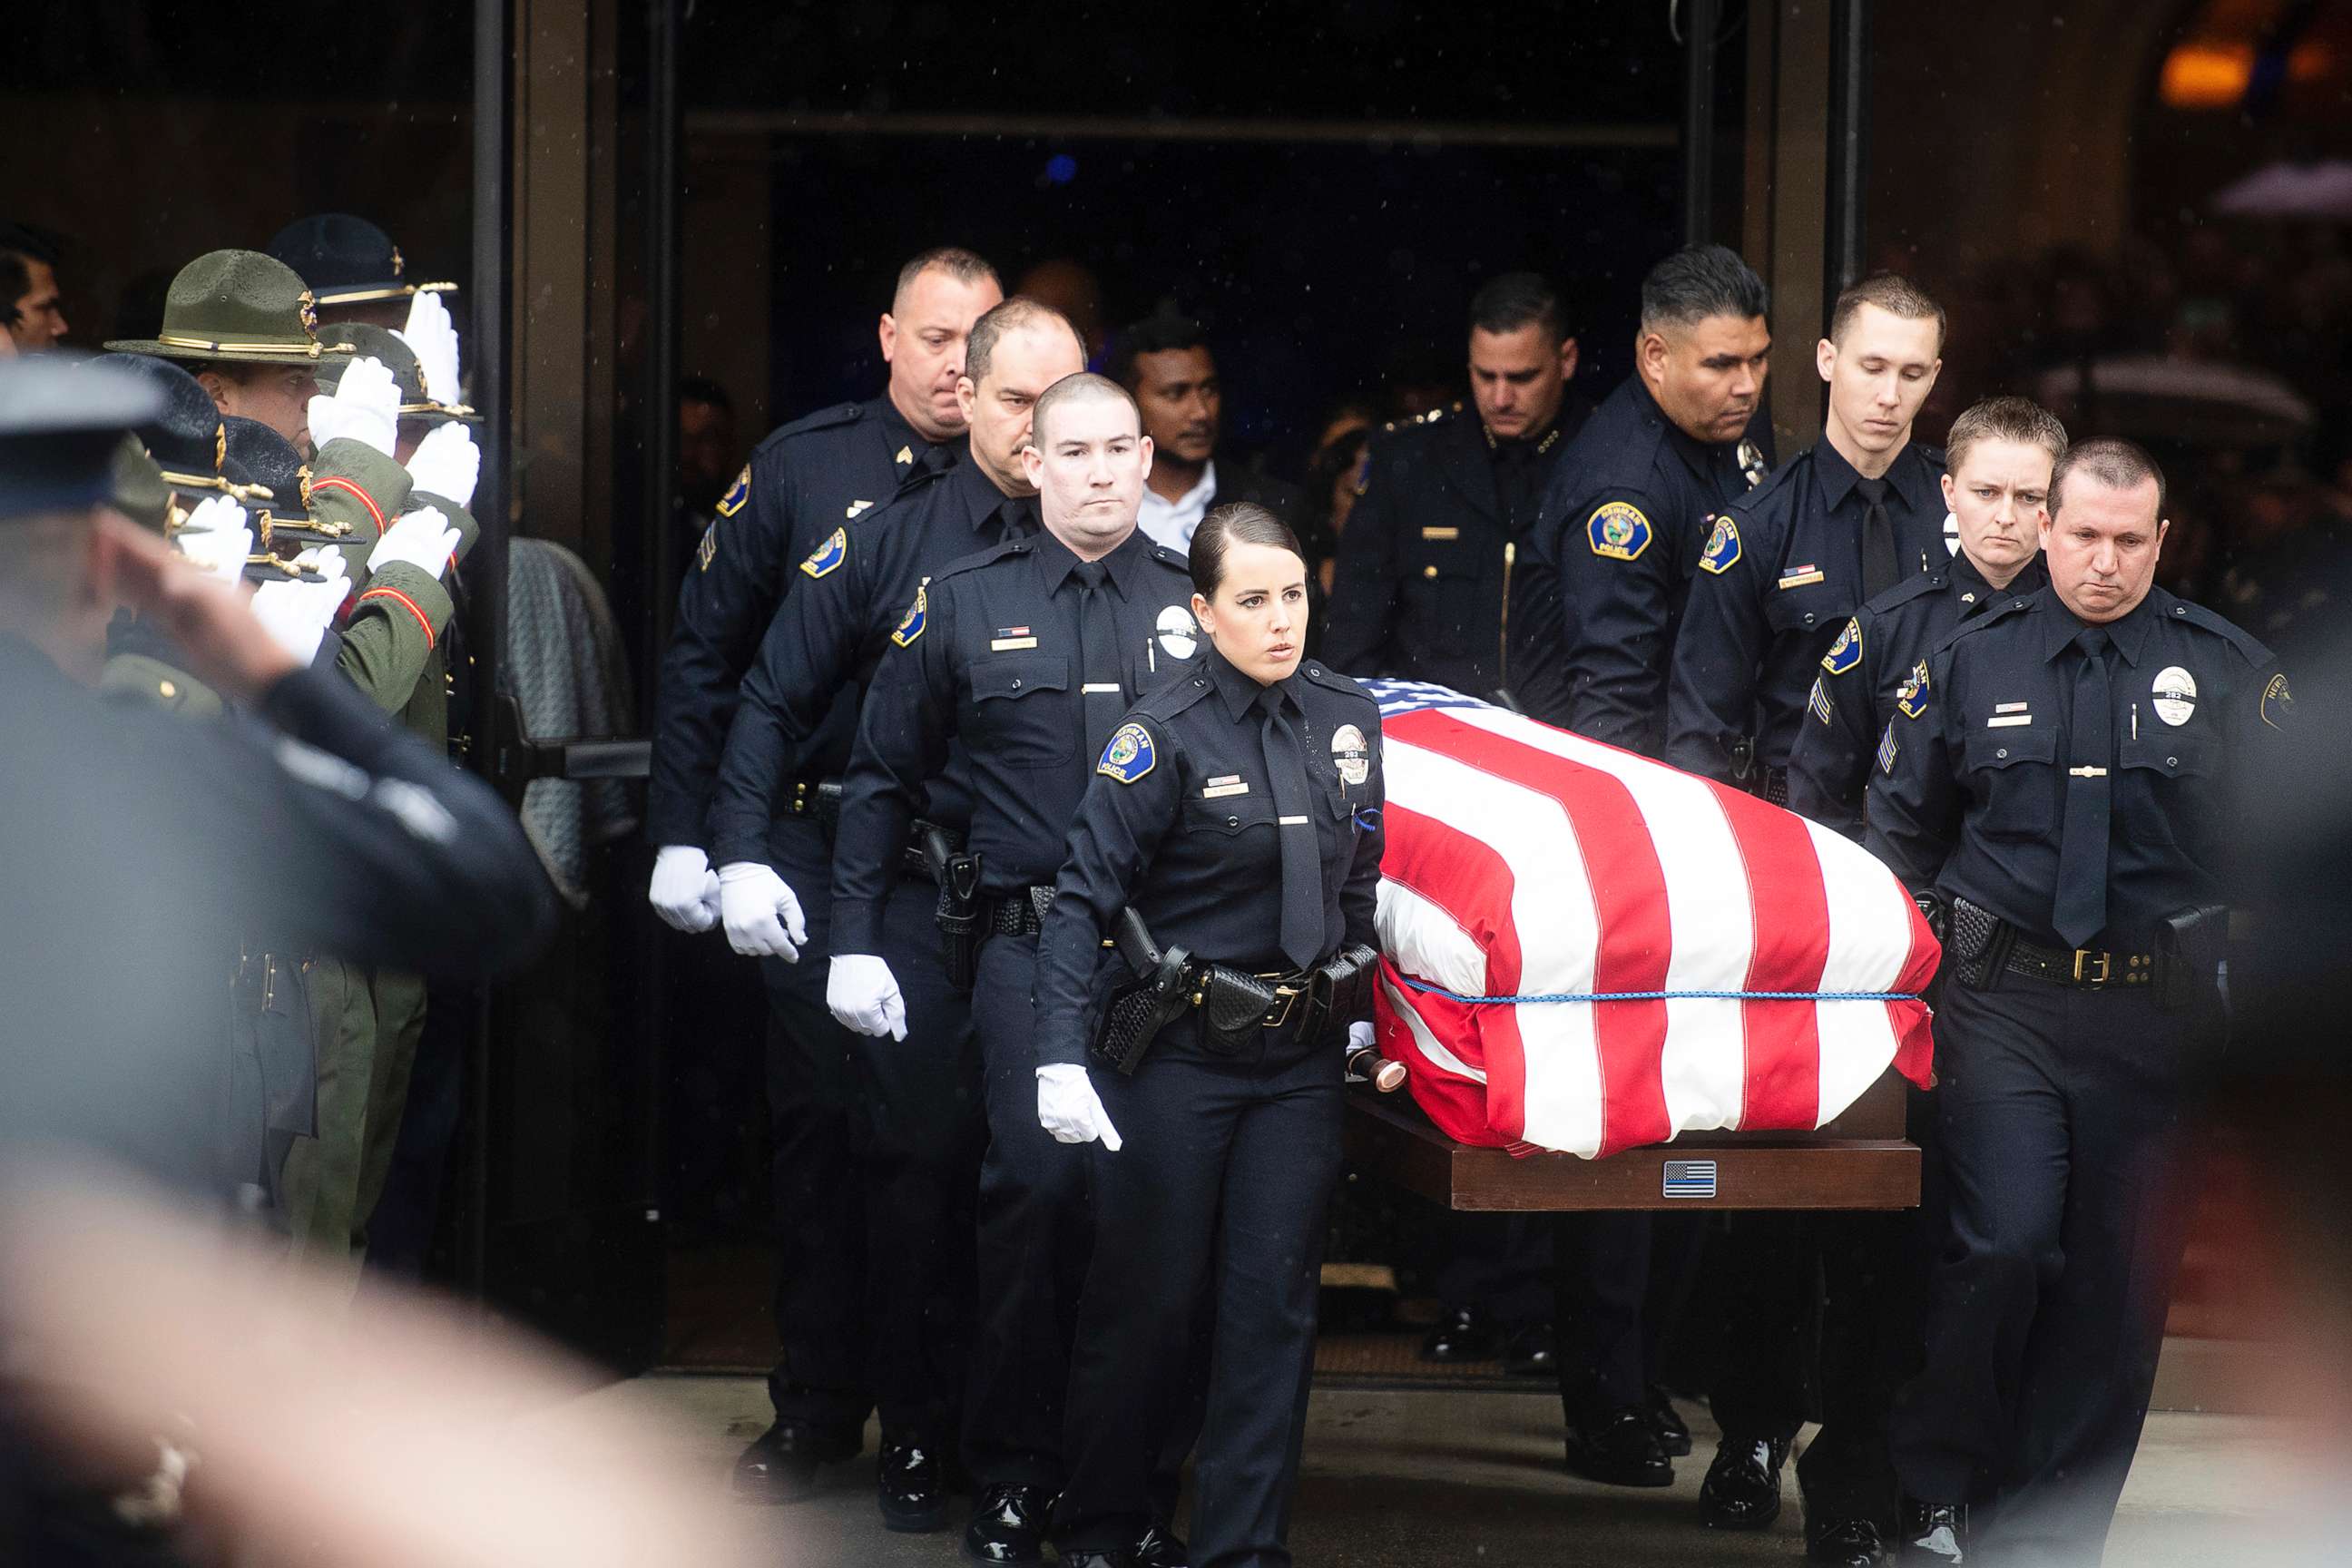 PHOTO: Newman police officers carry the body of their slain colleague Cpl. Ronil "Ron" Singh during his funeral on Jan. 5, 2019, in Modesto, Calif.